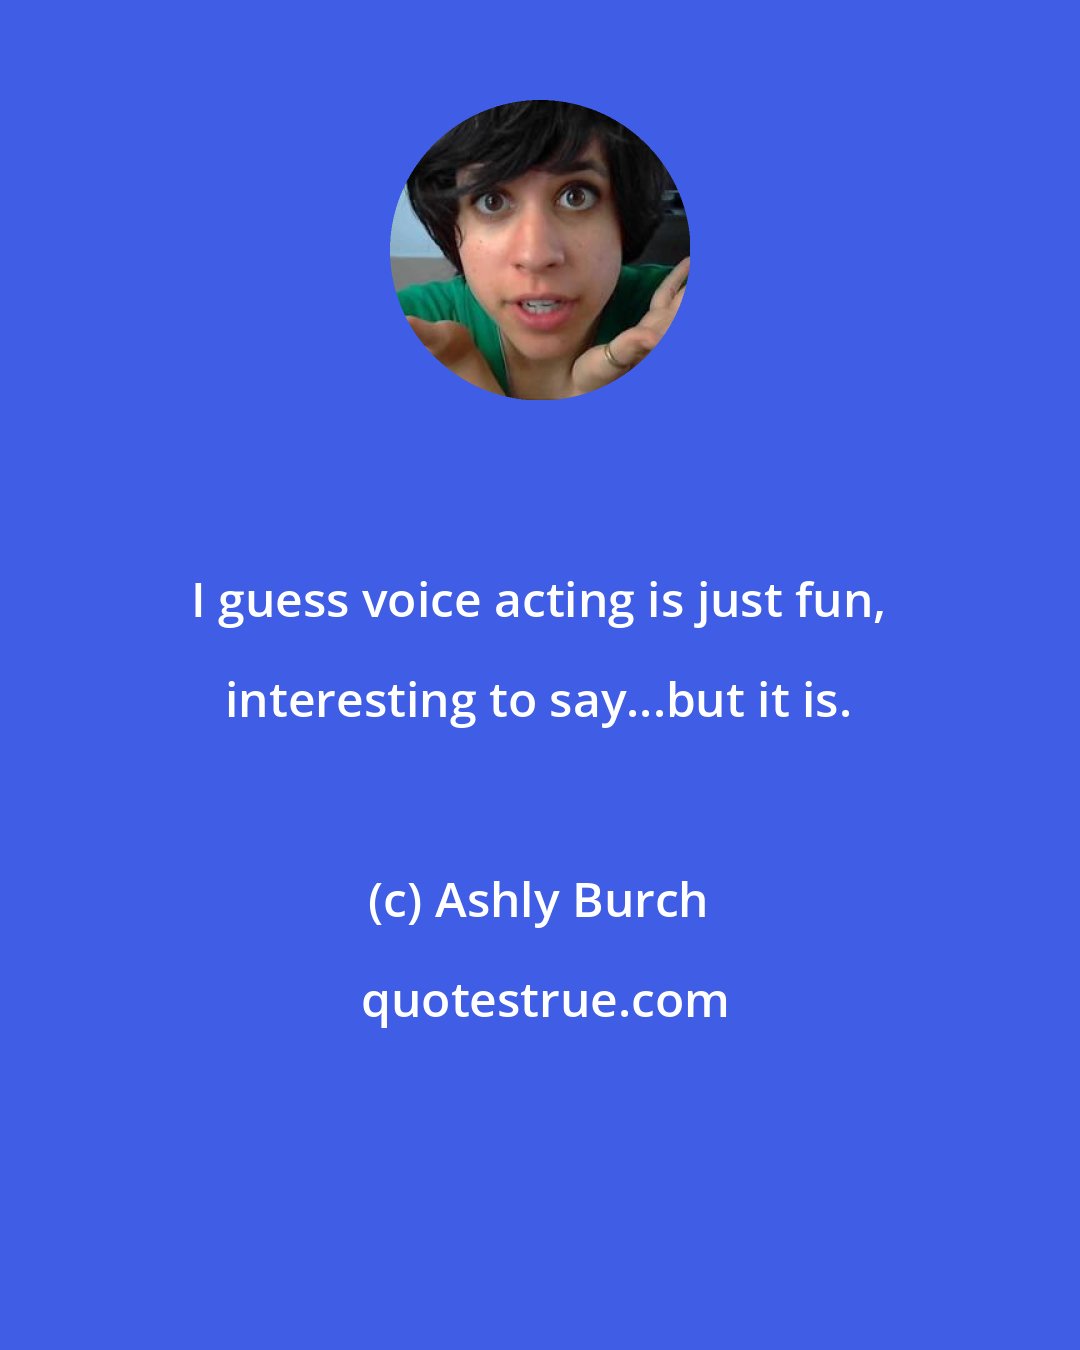 Ashly Burch: I guess voice acting is just fun, interesting to say...but it is.